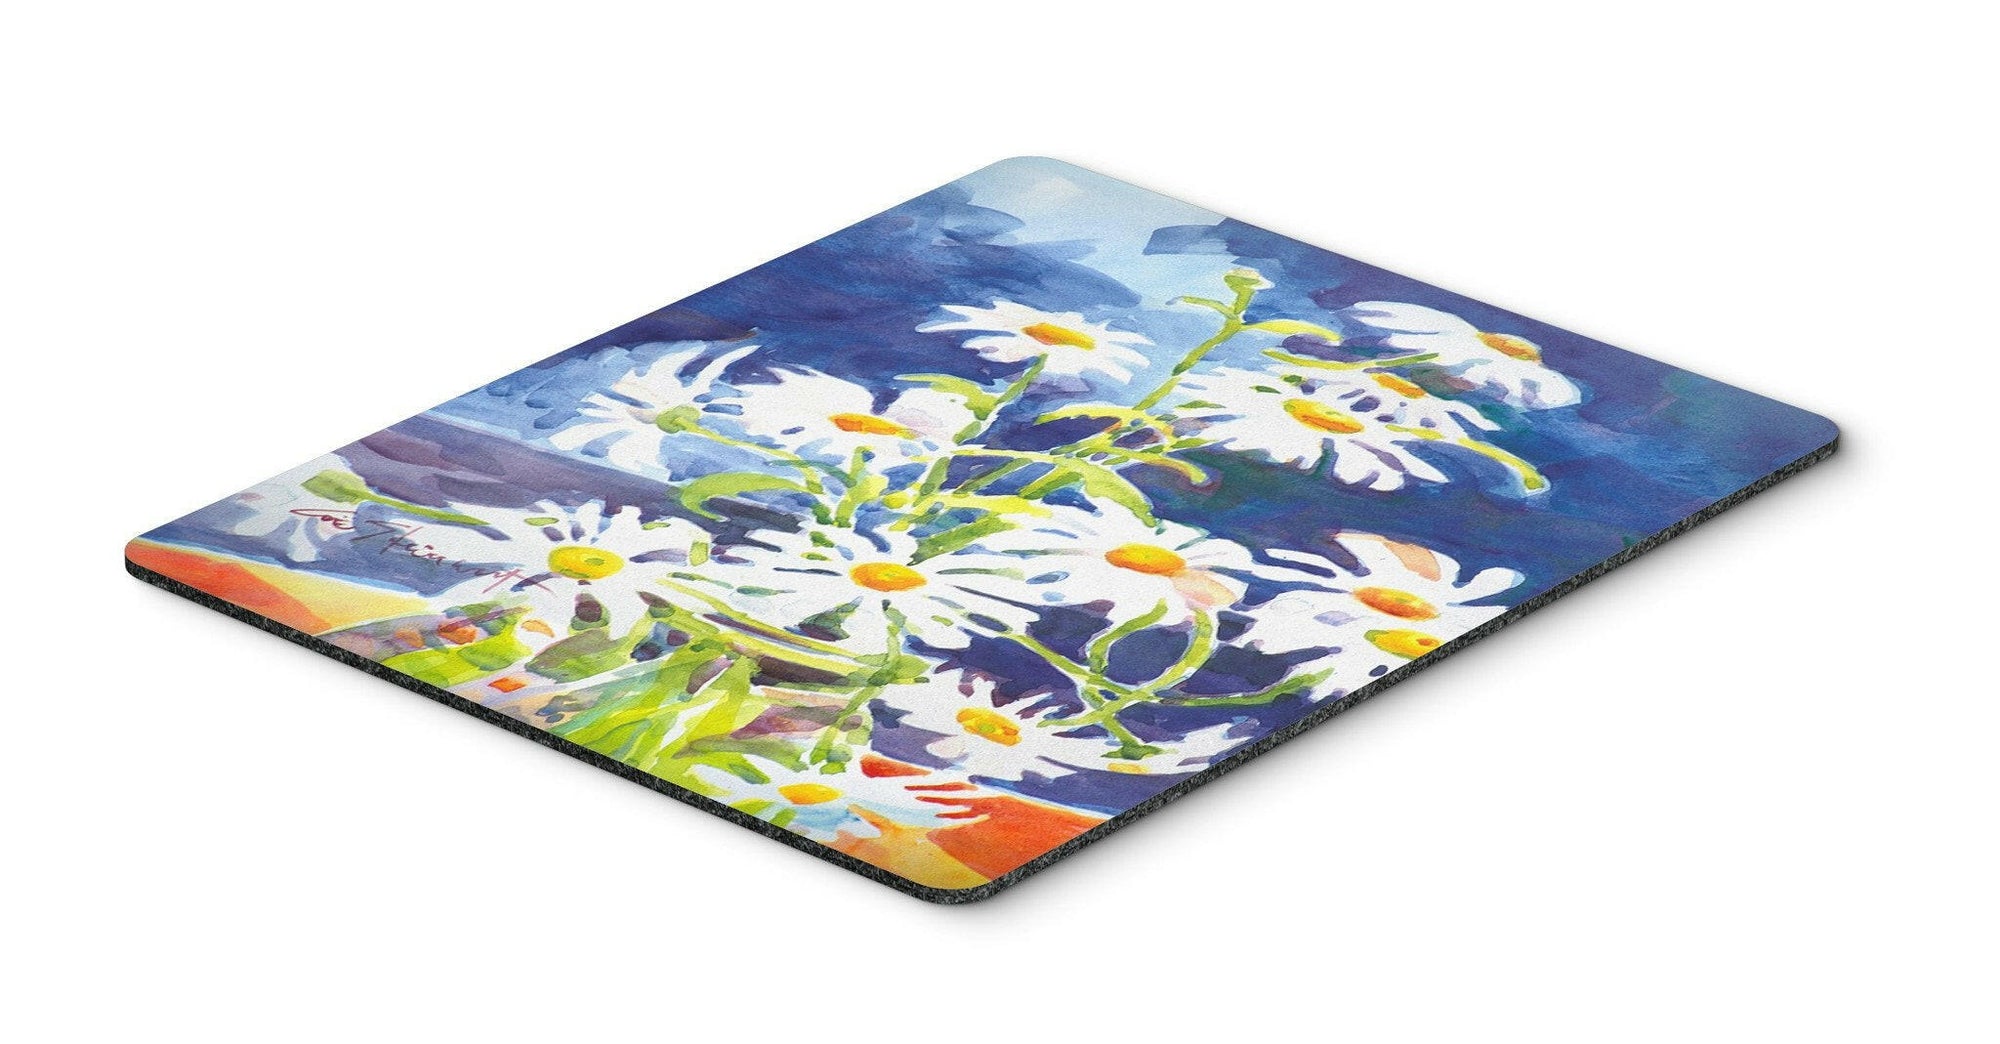 Flowers - Daisy Mouse Pad, Hot Pad or Trivet by Caroline's Treasures